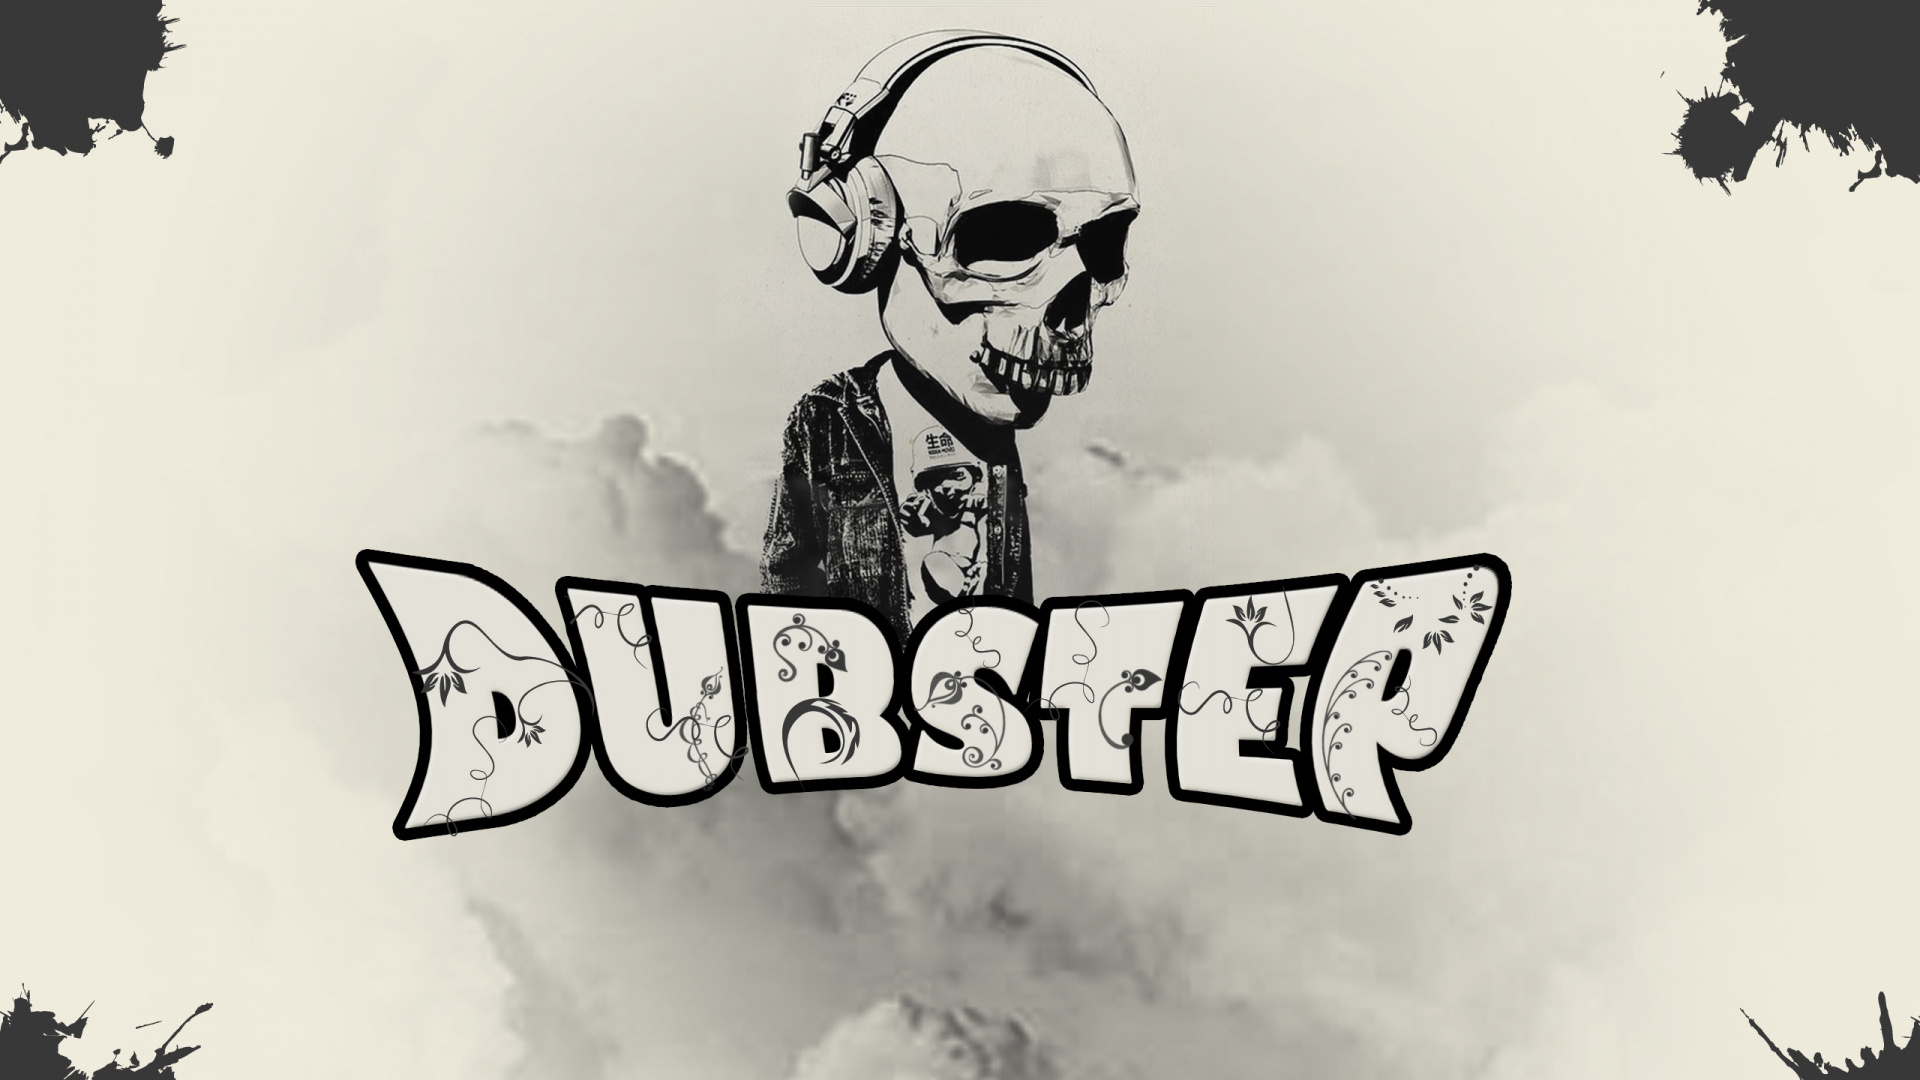 Drawing, Dubstep, Graphic Design, Illustration, Text. Wallpaper in 1920x1080 Resolution